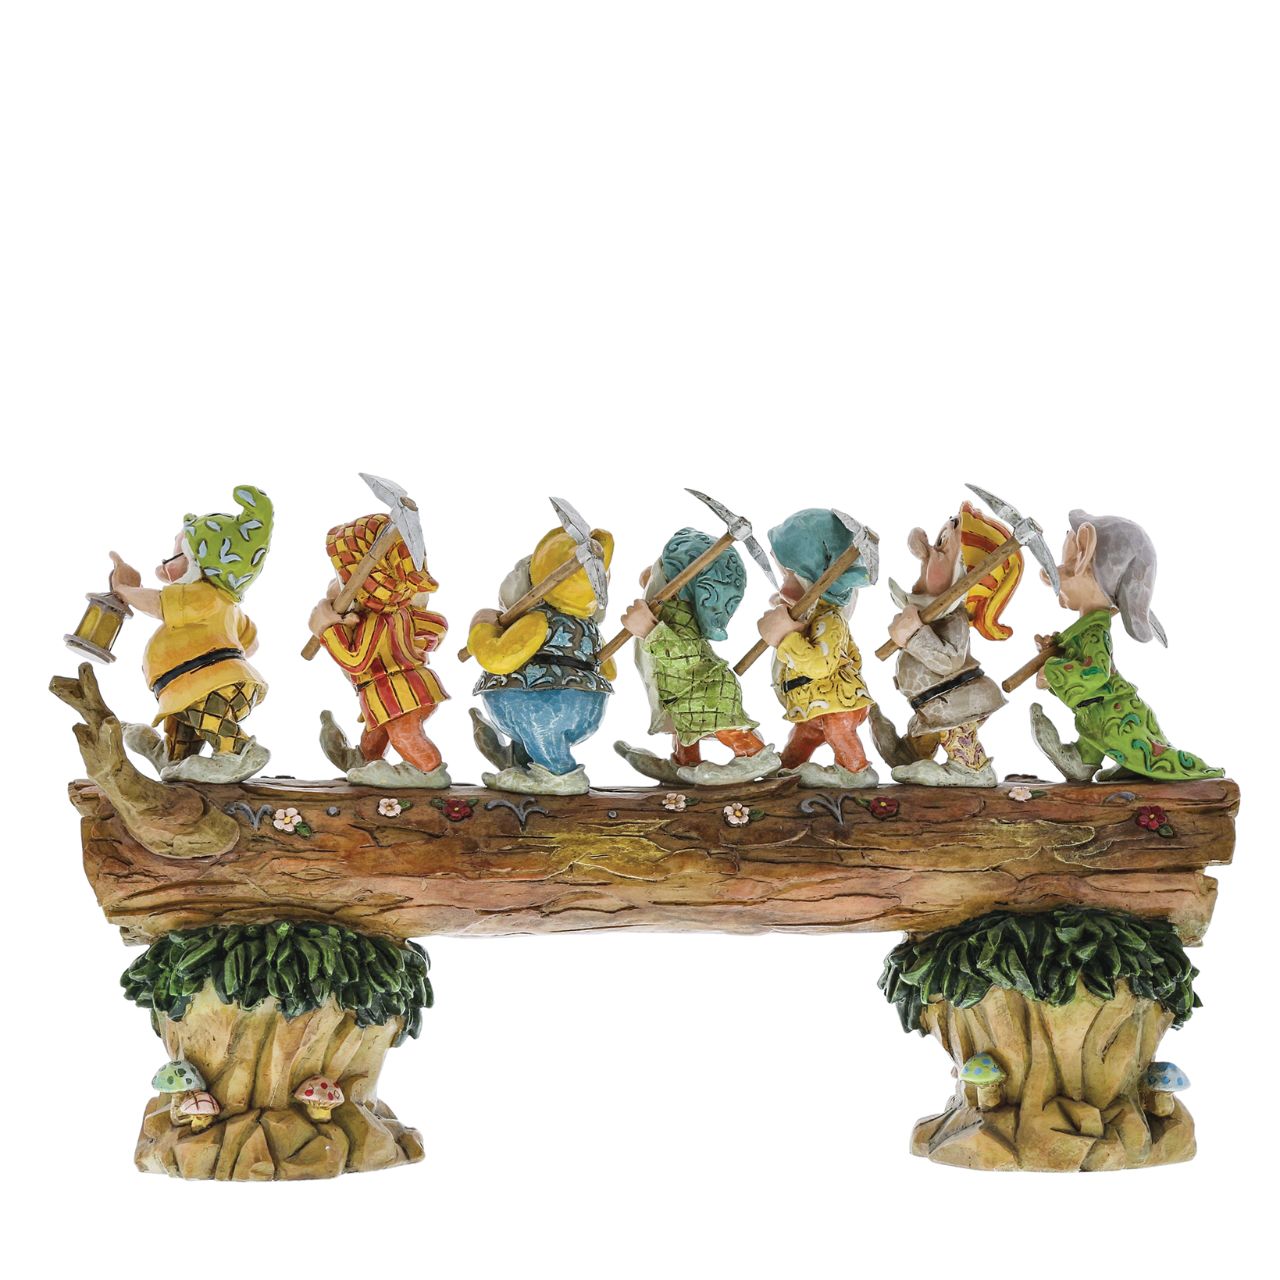 Disney Traditions Homeward Bound Seven Dwarfs Figurine  Homeward Bound captures a very memorable scene from the classic Snow White animation; the lovable 7 Dwarfs return home to find an unexpected house guest: a sleeping Princess.